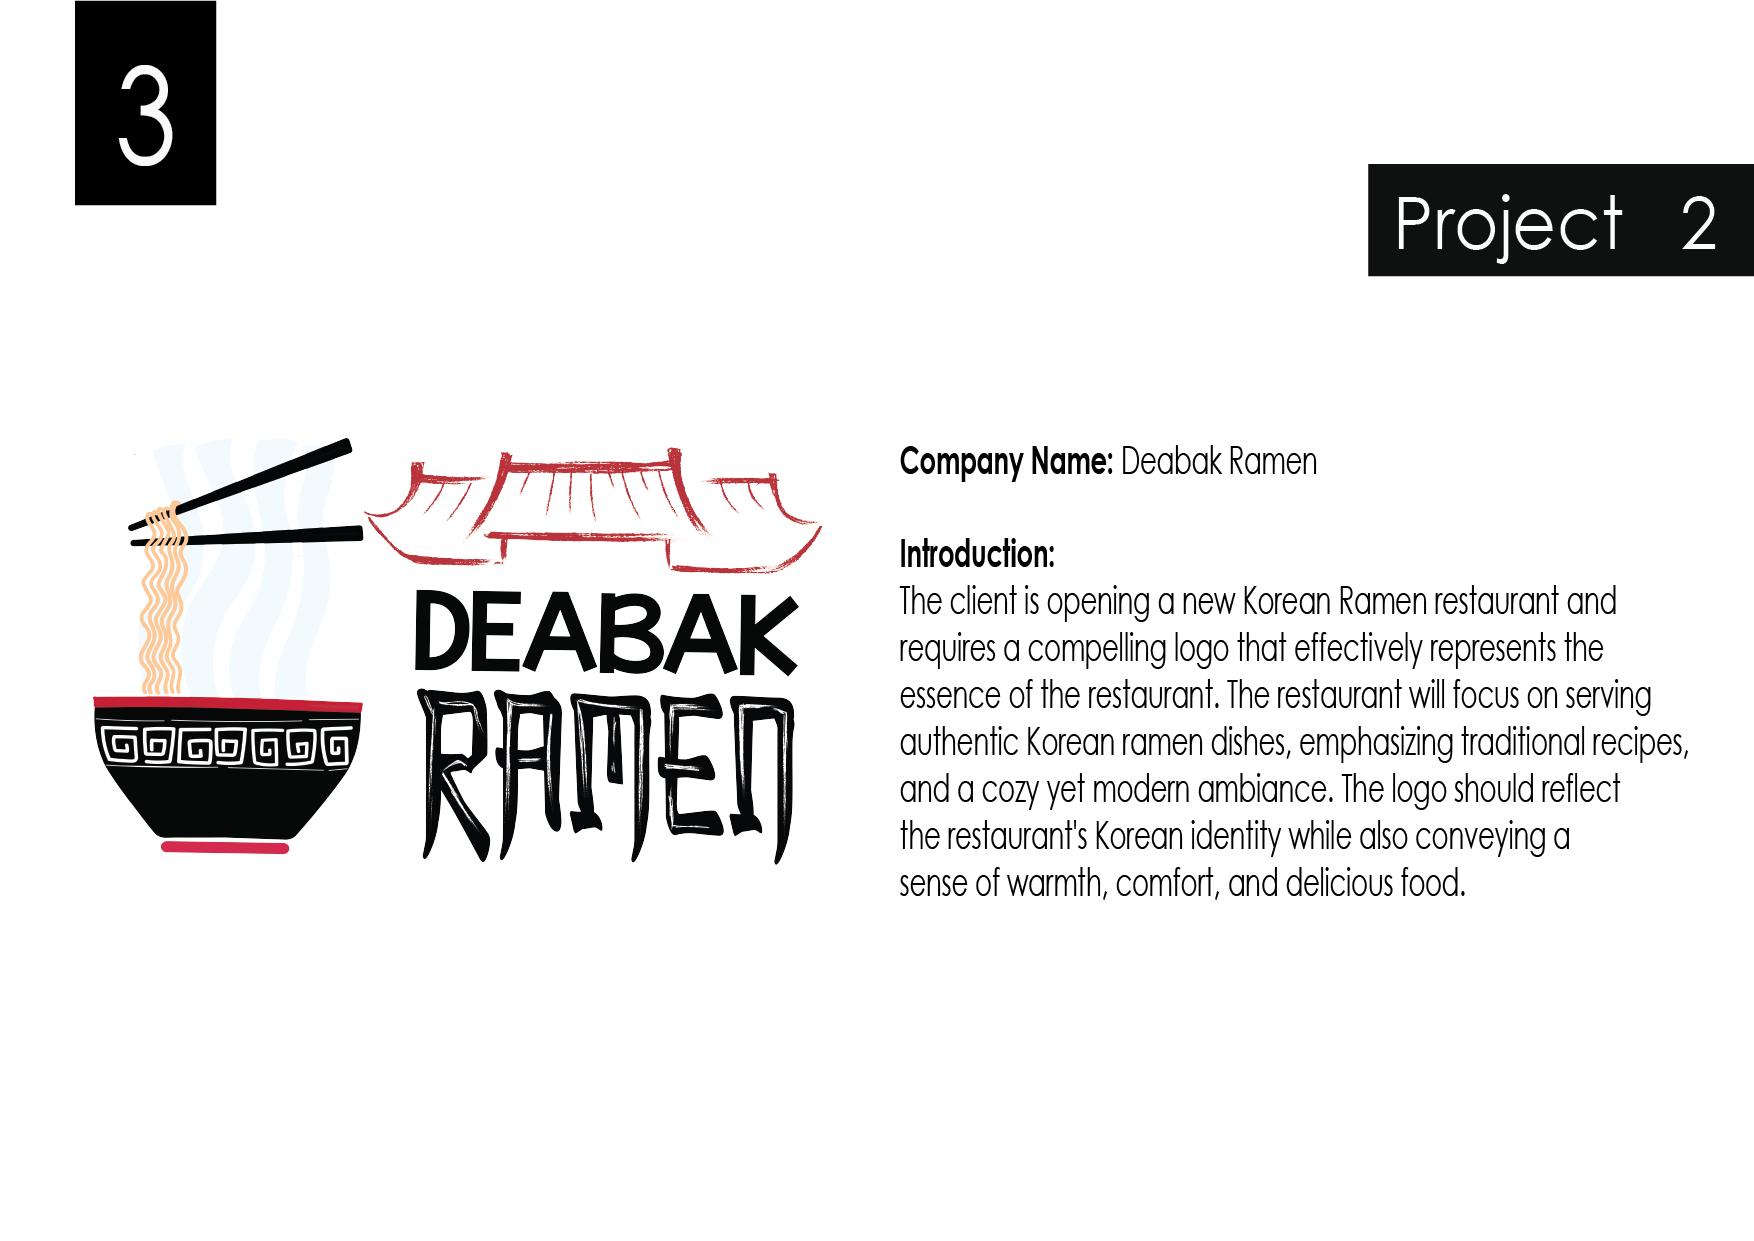 Company Name: Deabak Ramen

Introduction:

The client is opening a new Korean Ramen restaurant and
requires a compelling logo that effectively represents the
essence of the restaurant. The restaurant will focus on serving
authentic Korean ramen dishes, emphasizing fradifional recipes,
and a cozy yet modem ambiance. The logo should reflect

the restaurant's Korean identity while also conveying a

sense of warmth, comfort, and delicious food.